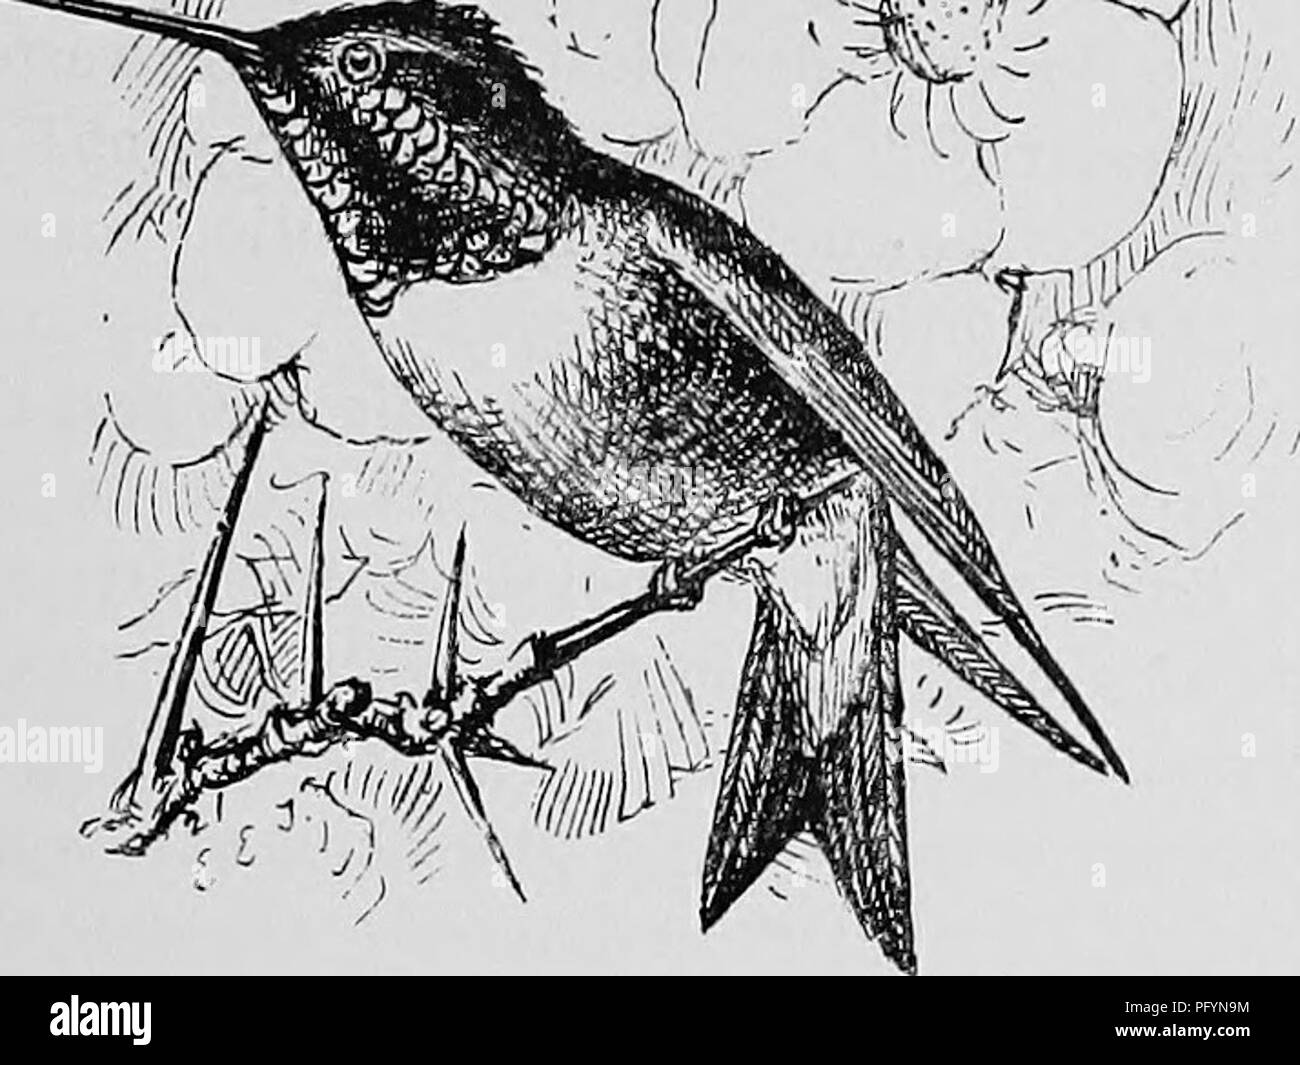 . A popular handbook of the ornithology of the United States and Canada, based on Nuttall's Manual. Birds; Birds. 'M // yf(j ^. ^ ^^.^^. RUBY-THROATED HUMMING BIRD. Trochilus colubris. Char. Above, metallic green; wings and tail brownish violet or bronzy; chin velvety black ; throat rich ruby, reflecting various hues from brownish black to bright crimson ; belly whitish. Female and young without red on the throat, which is dull gray; tail-feathers barred with black and tipped with white. Length 3 to 3X inches. Nest. In an orchard or open woodland; placed on a horizontal branch or in a crotch;  Stock Photo